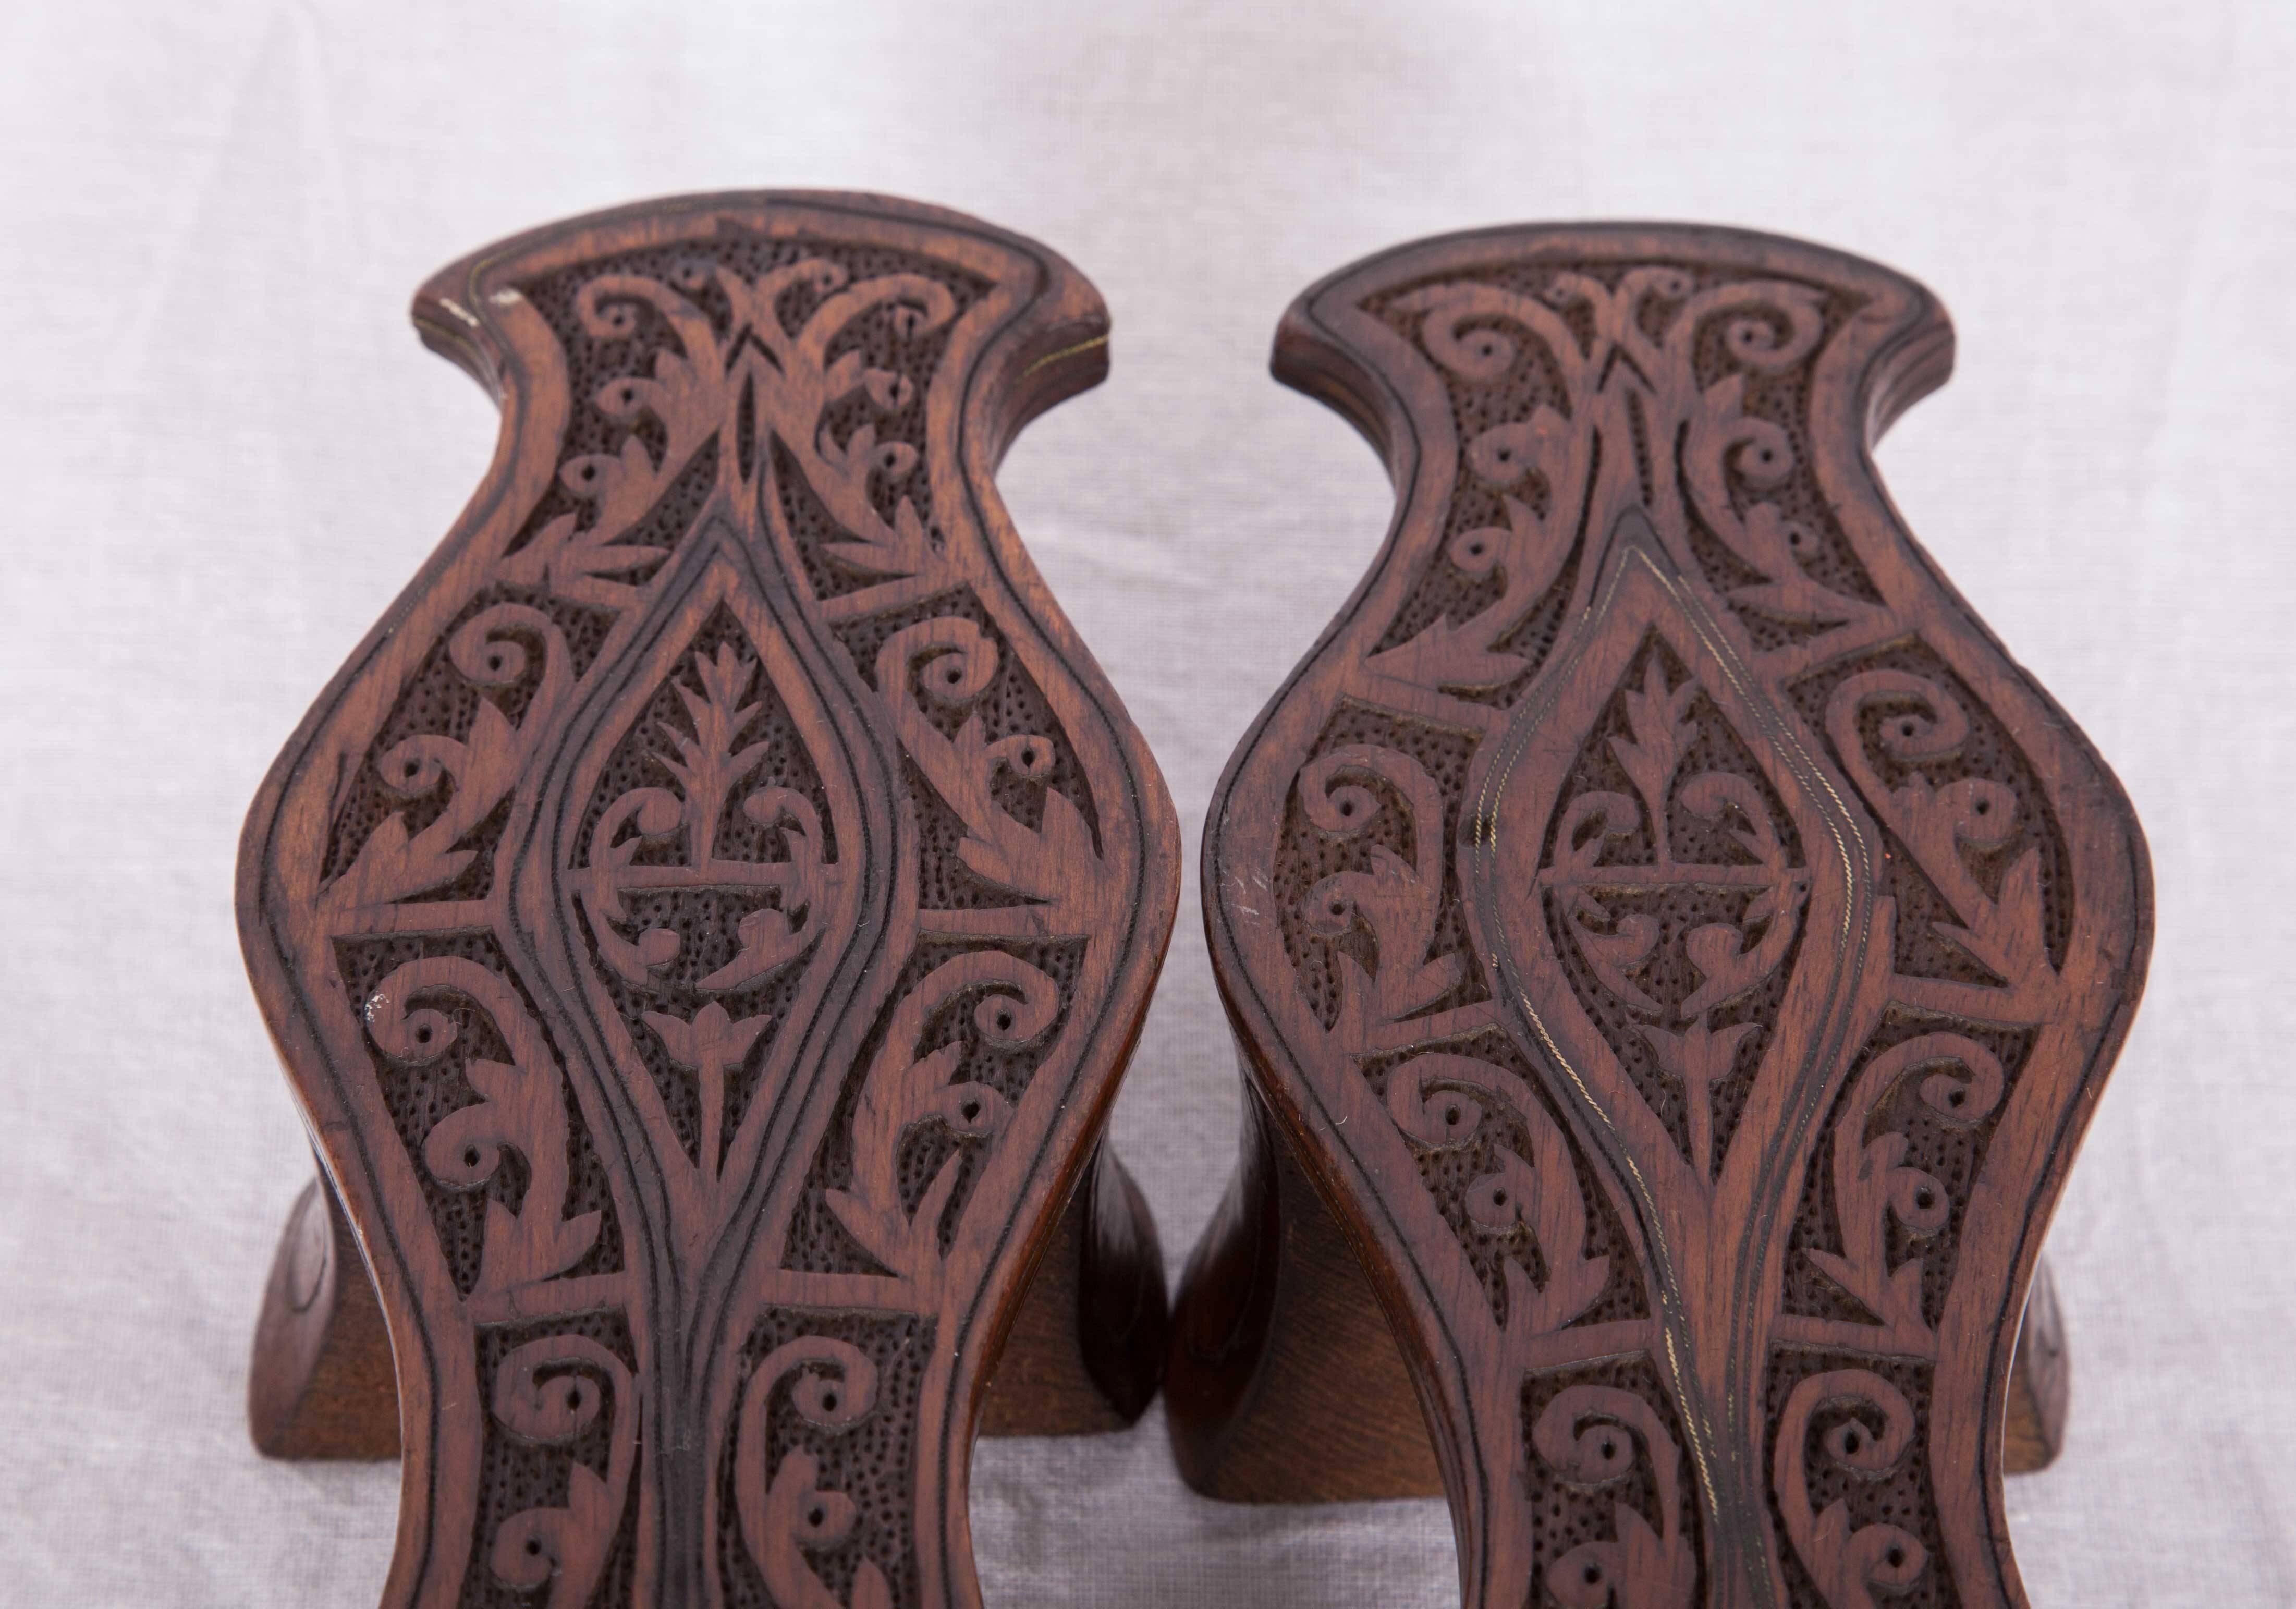 In very good shape. Carved out of wood and decorated, a lovely example to late 19th-early 20th century nalins.